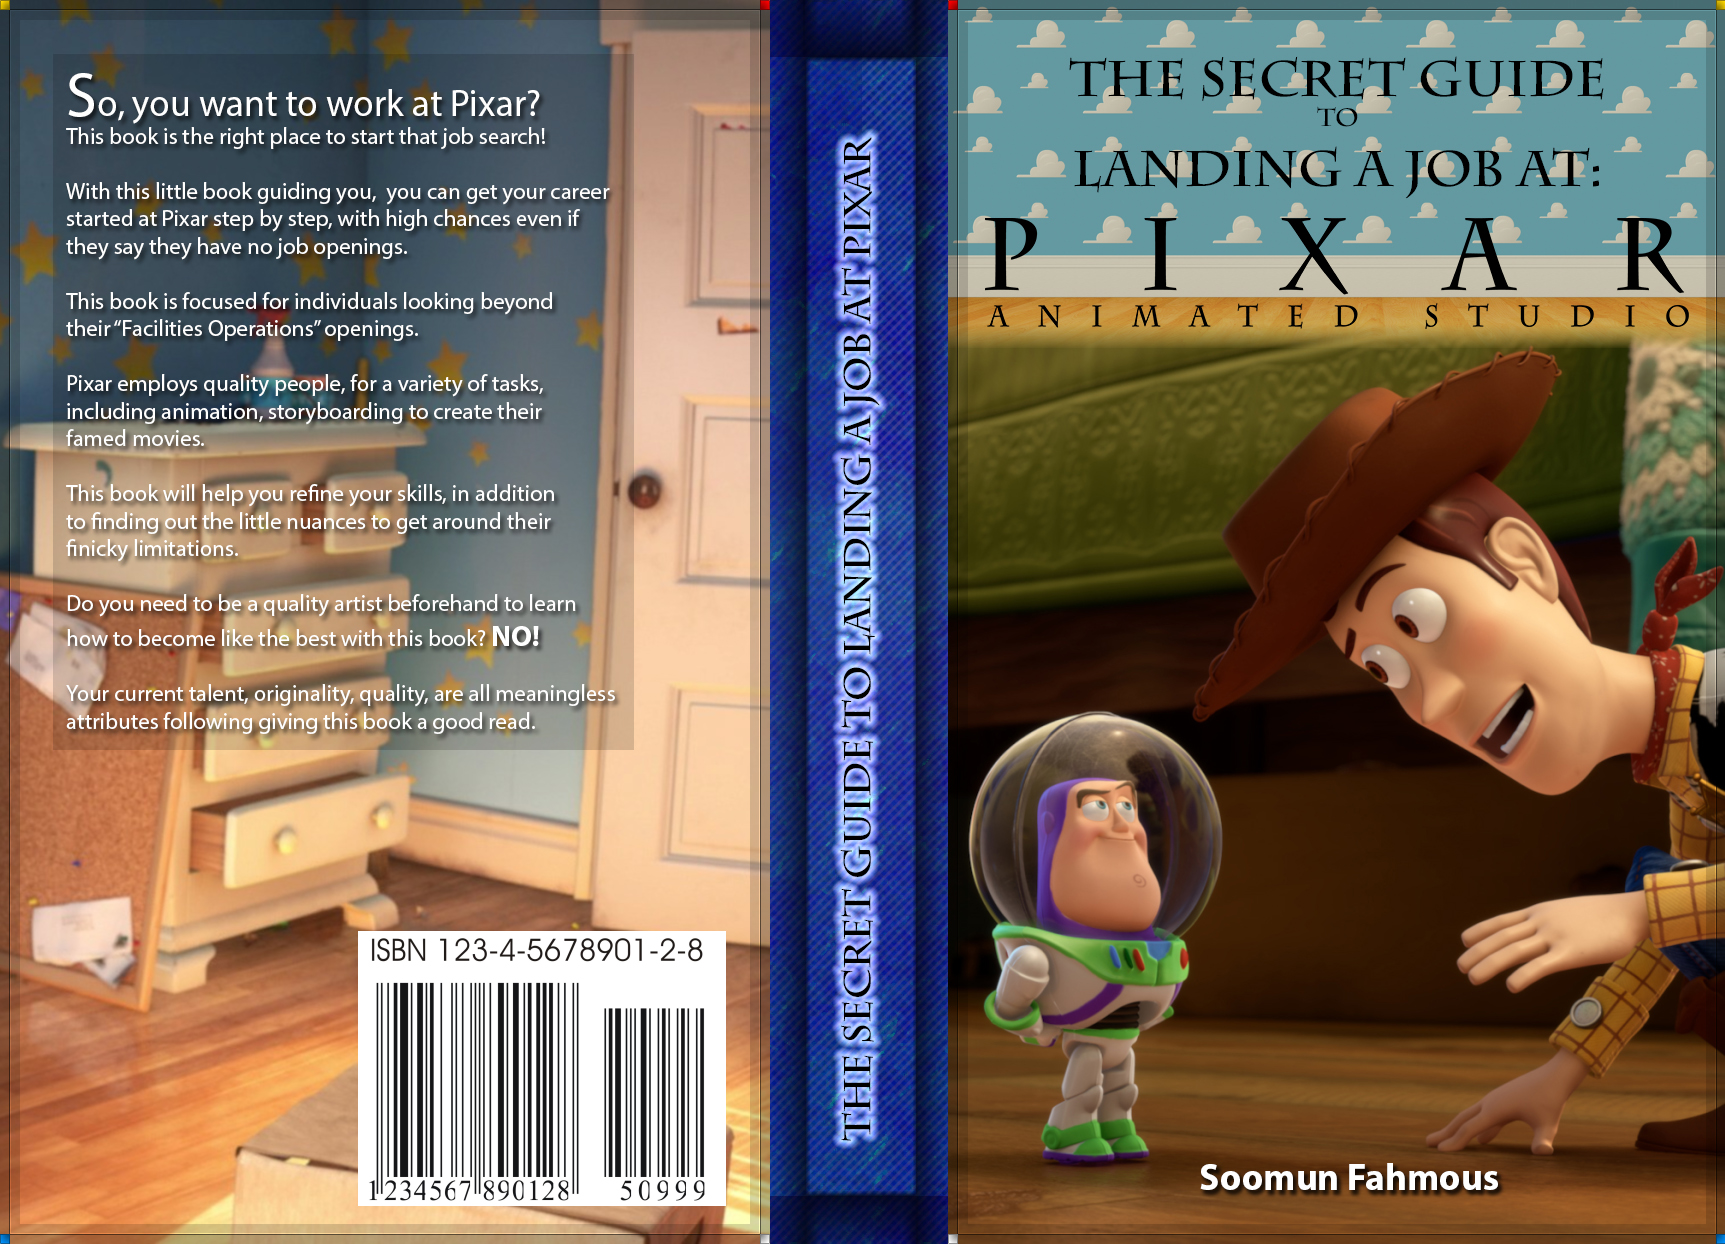 Fictional Book Cover: The Secret Guide to Landing a Job At Pixar<br>College Coursework for Photoshop<br><i>2013</i>